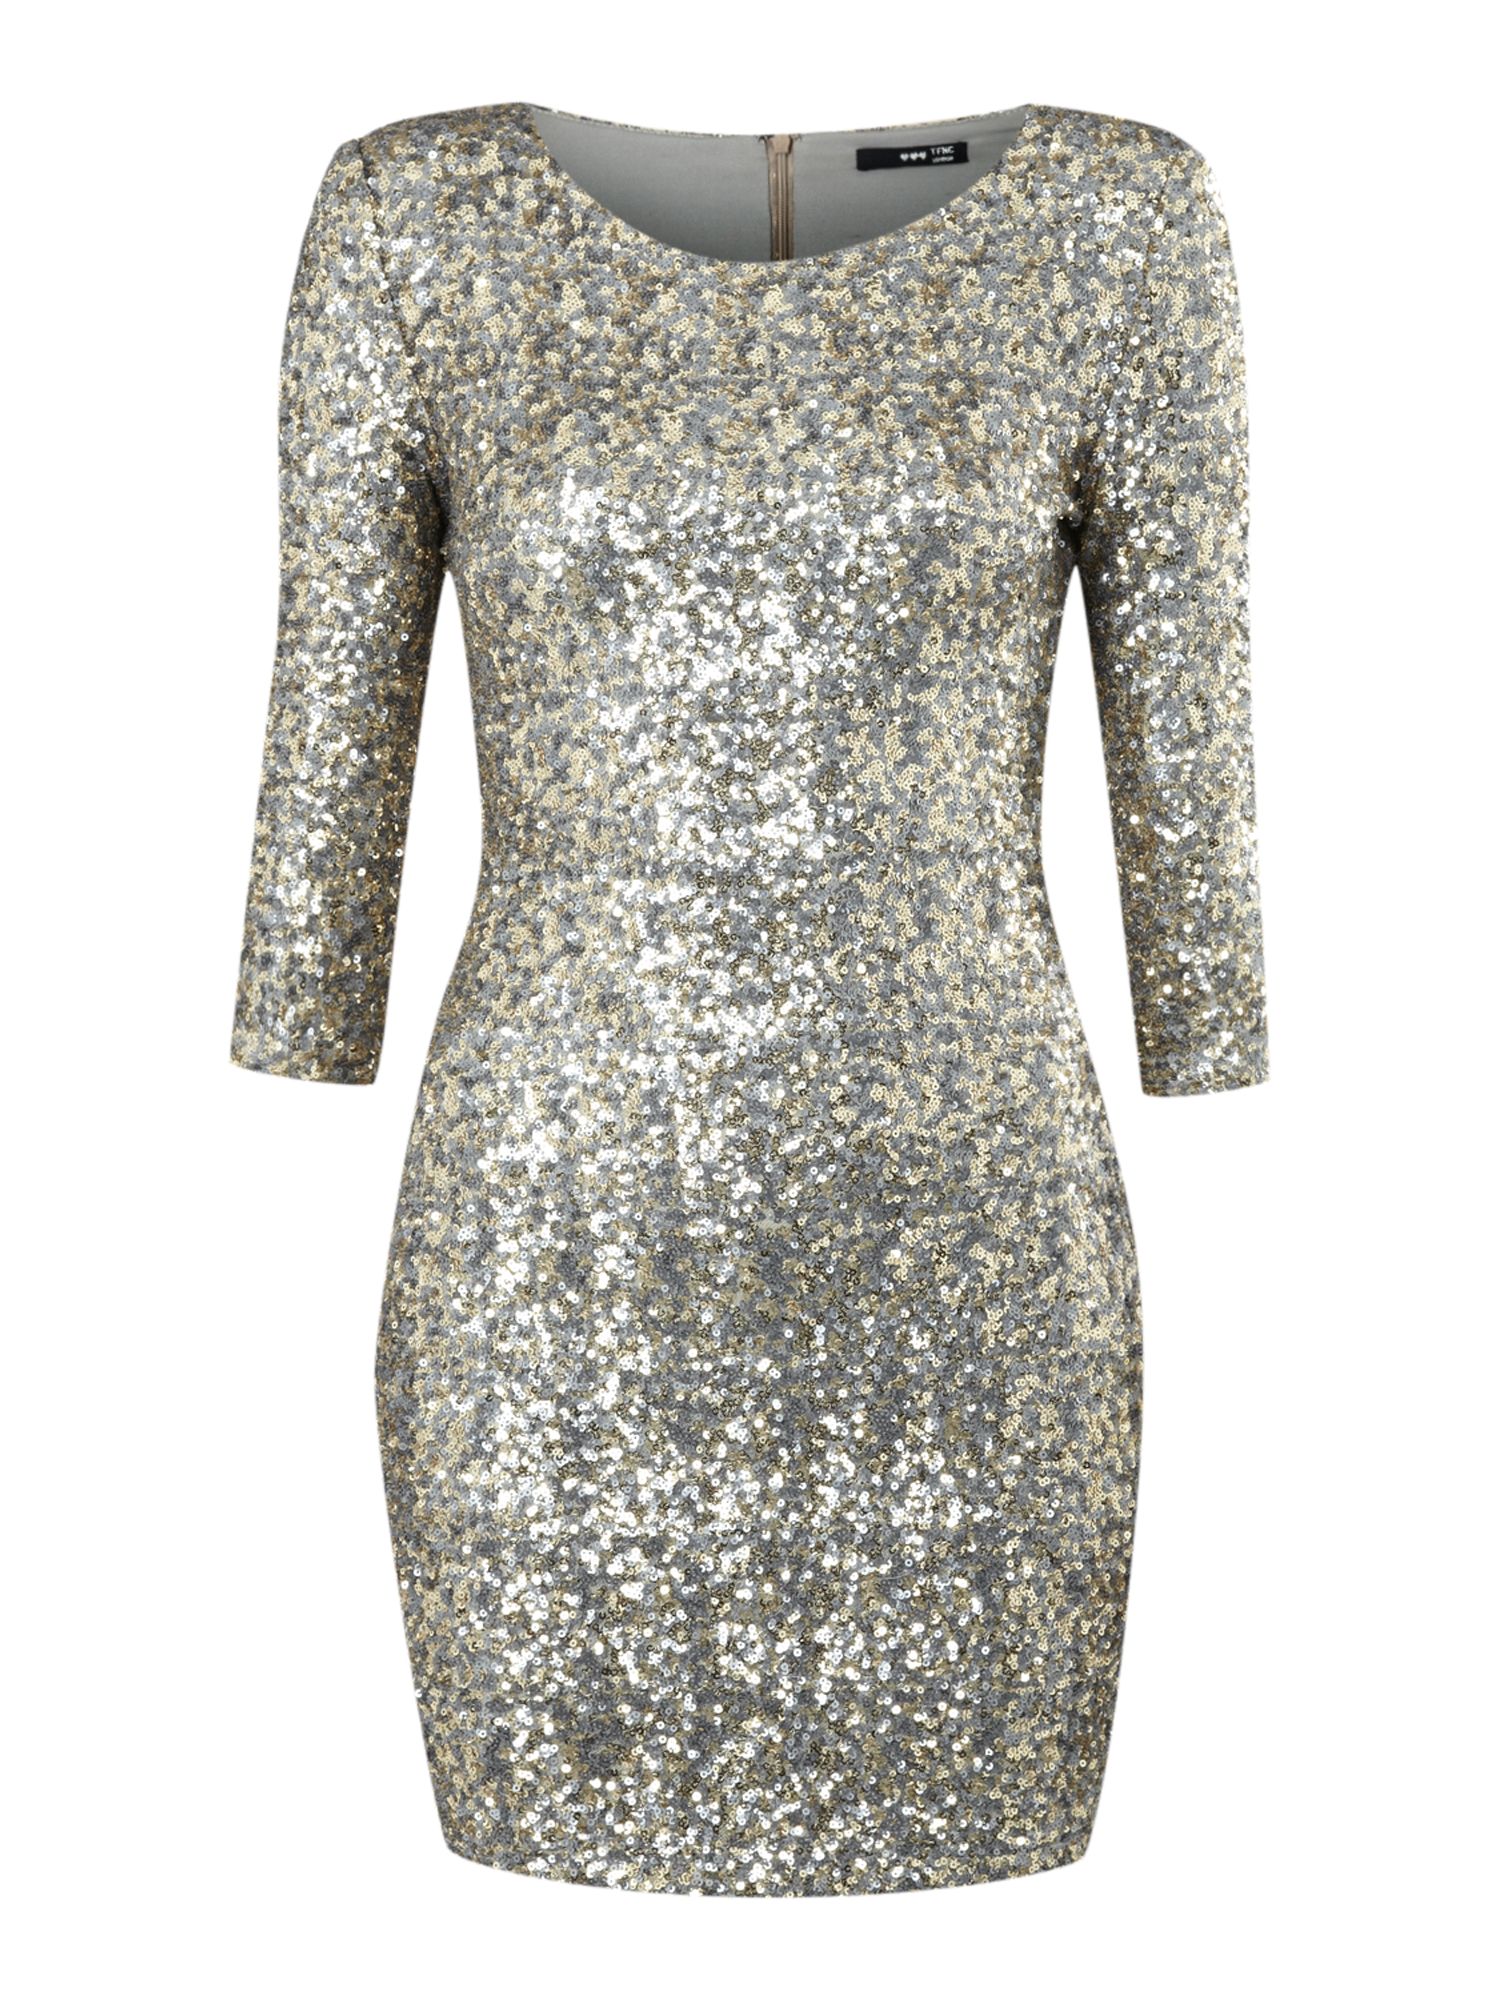 Tfnc All Over Sequin Paris Dress in Gold | Lyst